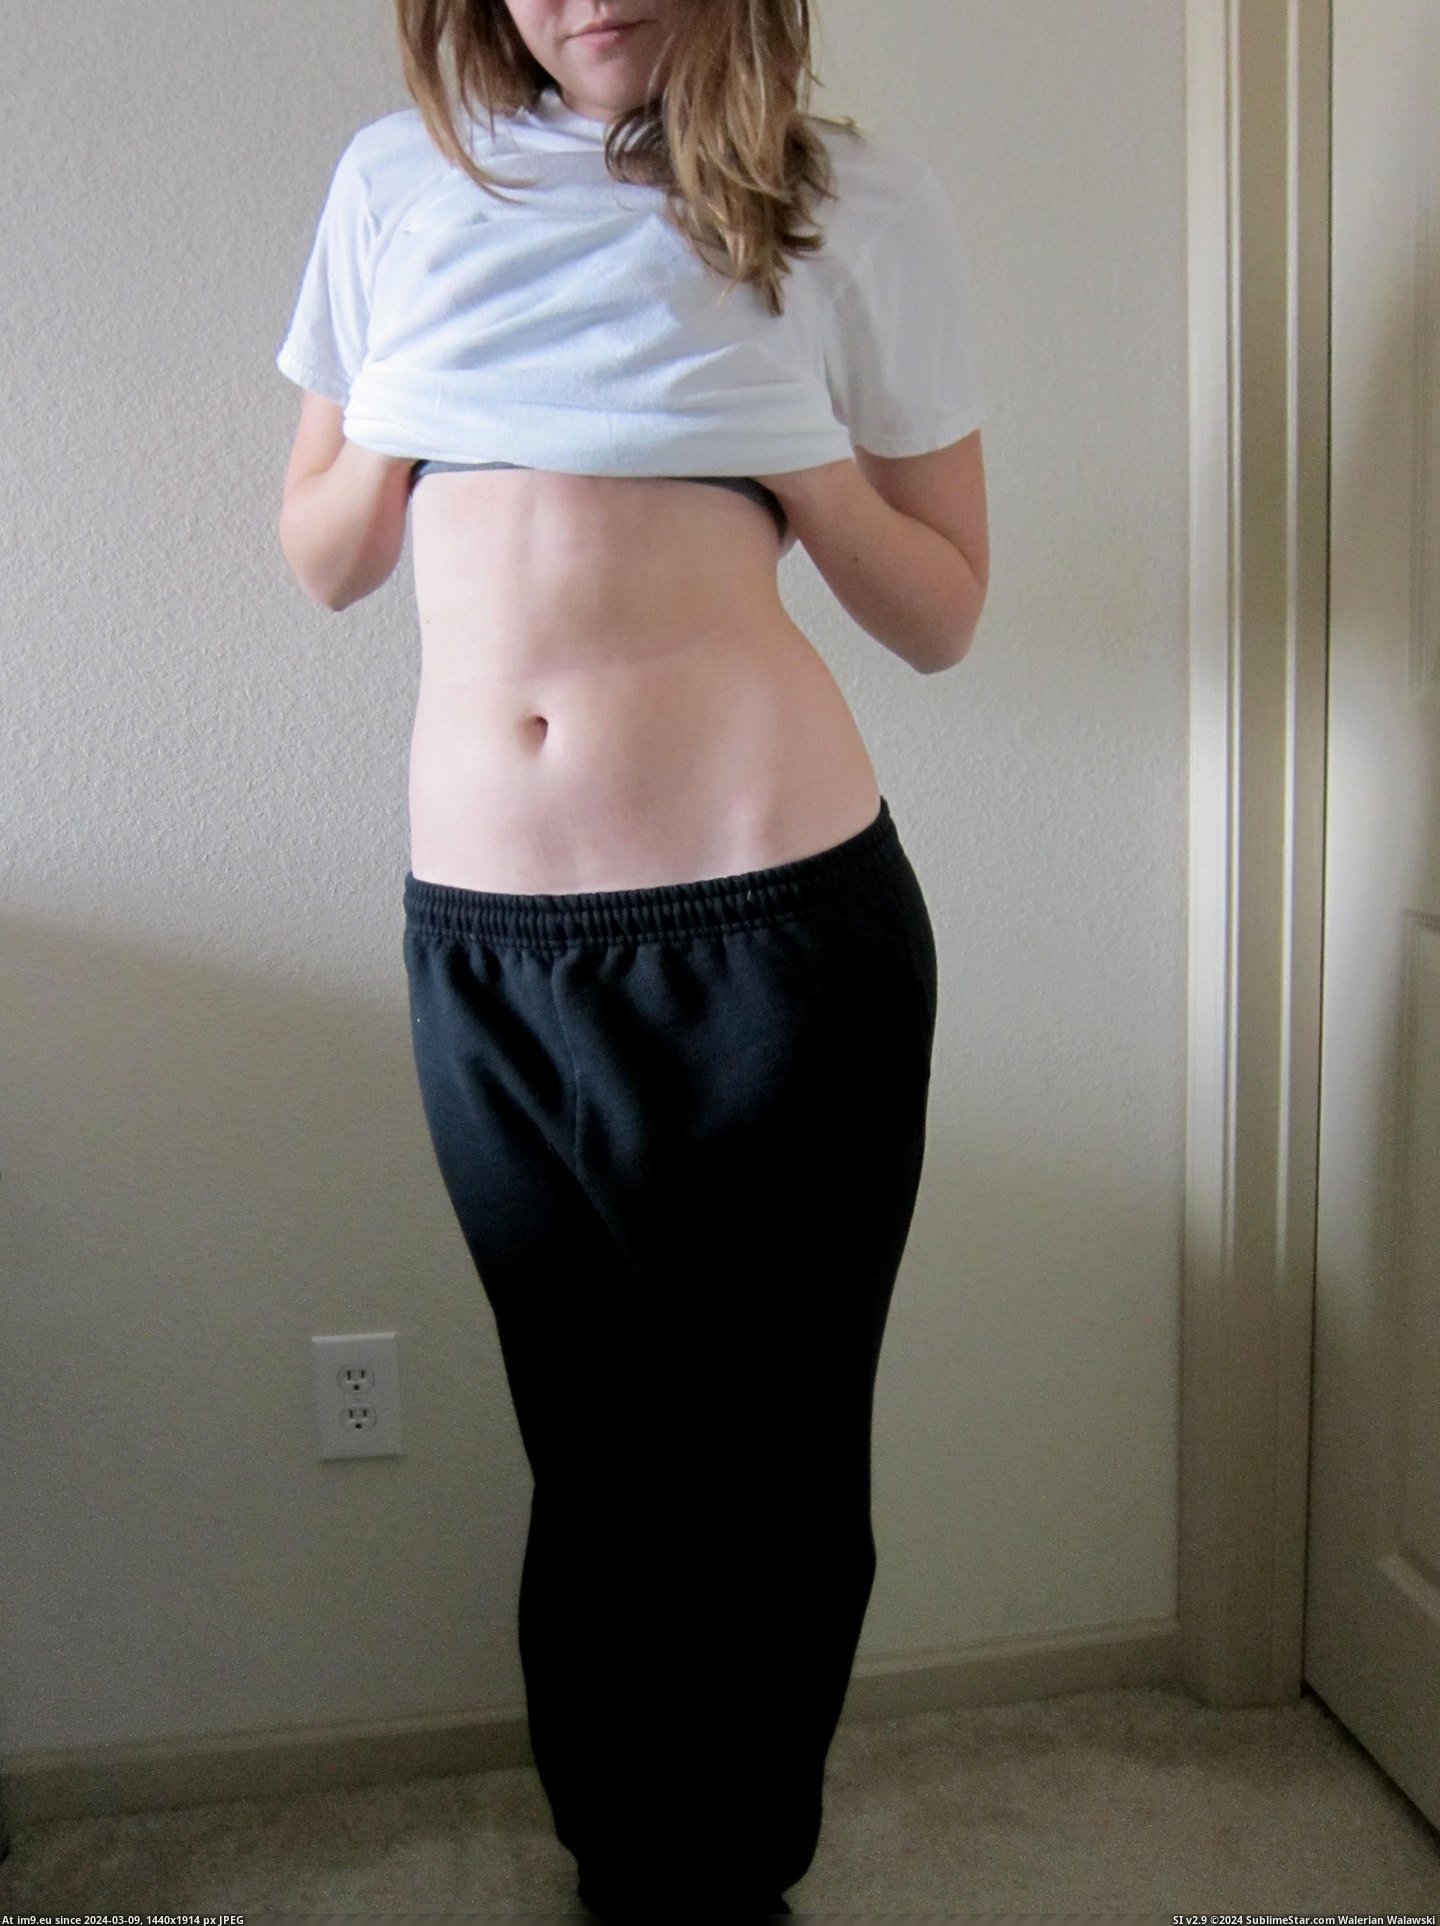 #Uck  #Sweatpants [Gonewild] [F]uck me in my sweatpants.... ;) 3 Pic. (Image of album My r/GONEWILD favs))